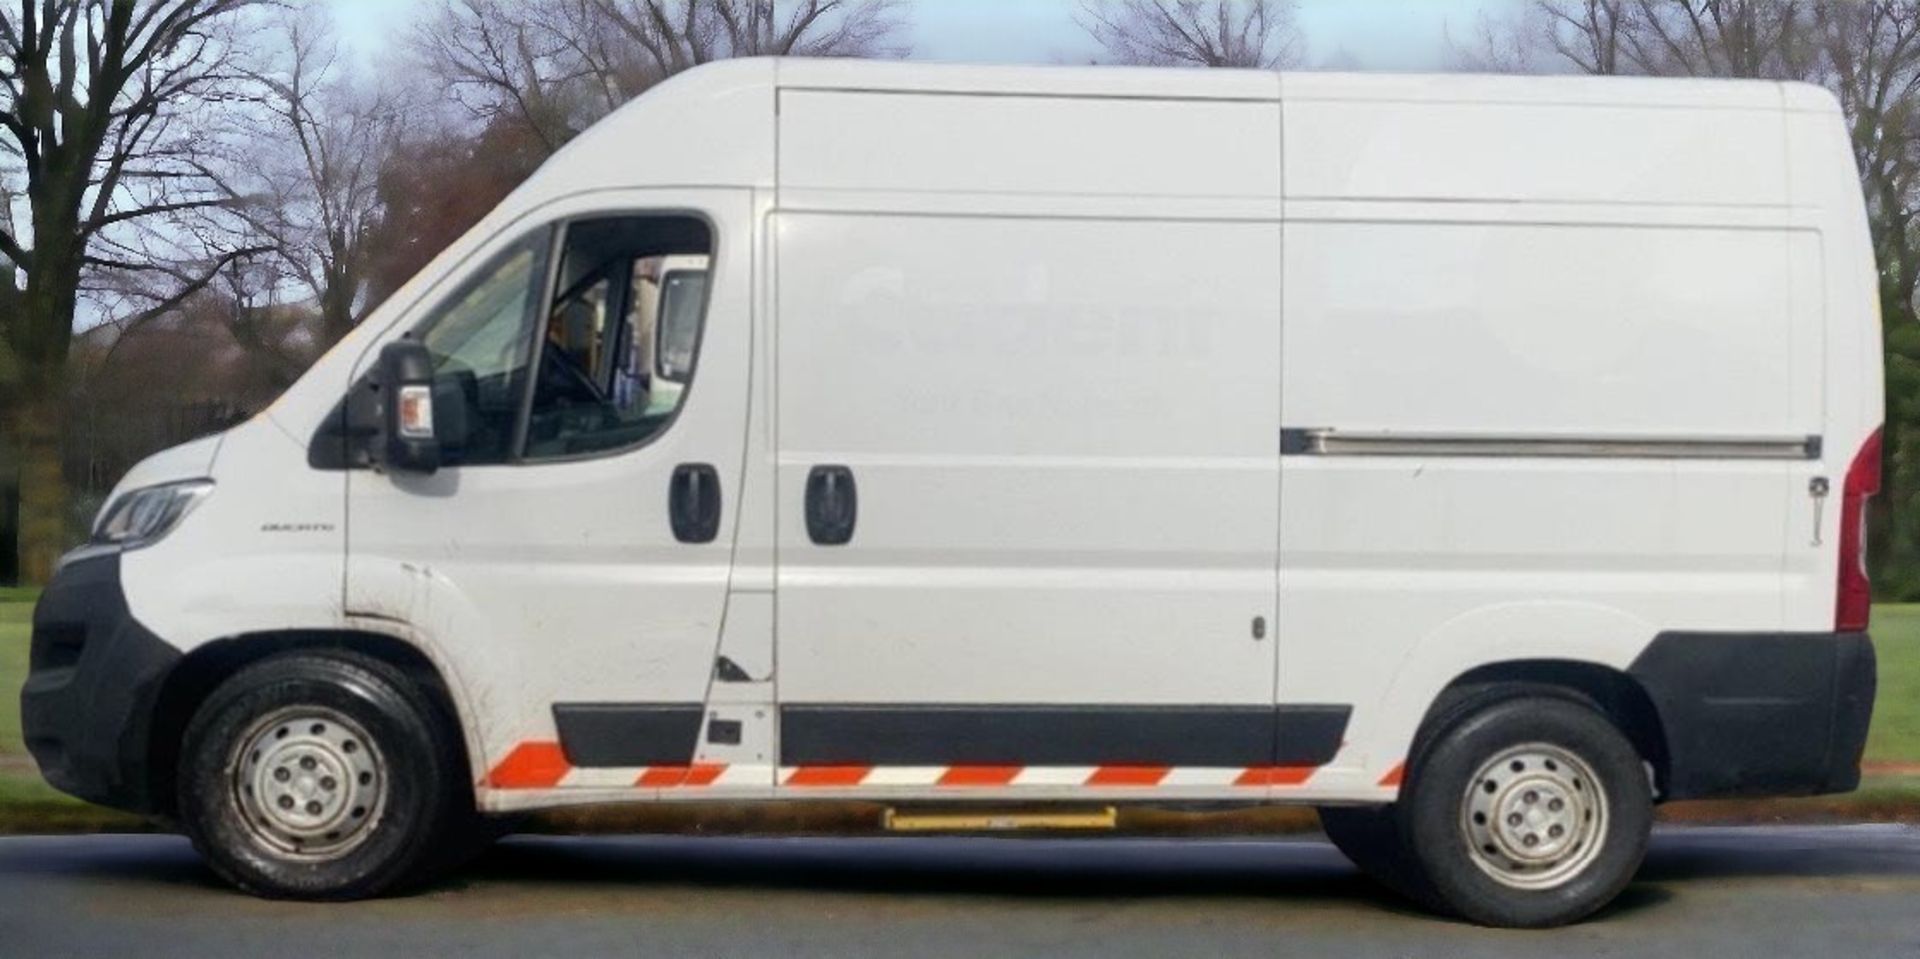 2019 FIAT DUCATO L2 MWB PANEL VAN - VERSATILE AND RELIABLE FOR YOUR BUSINESS NEEDS - Image 5 of 18